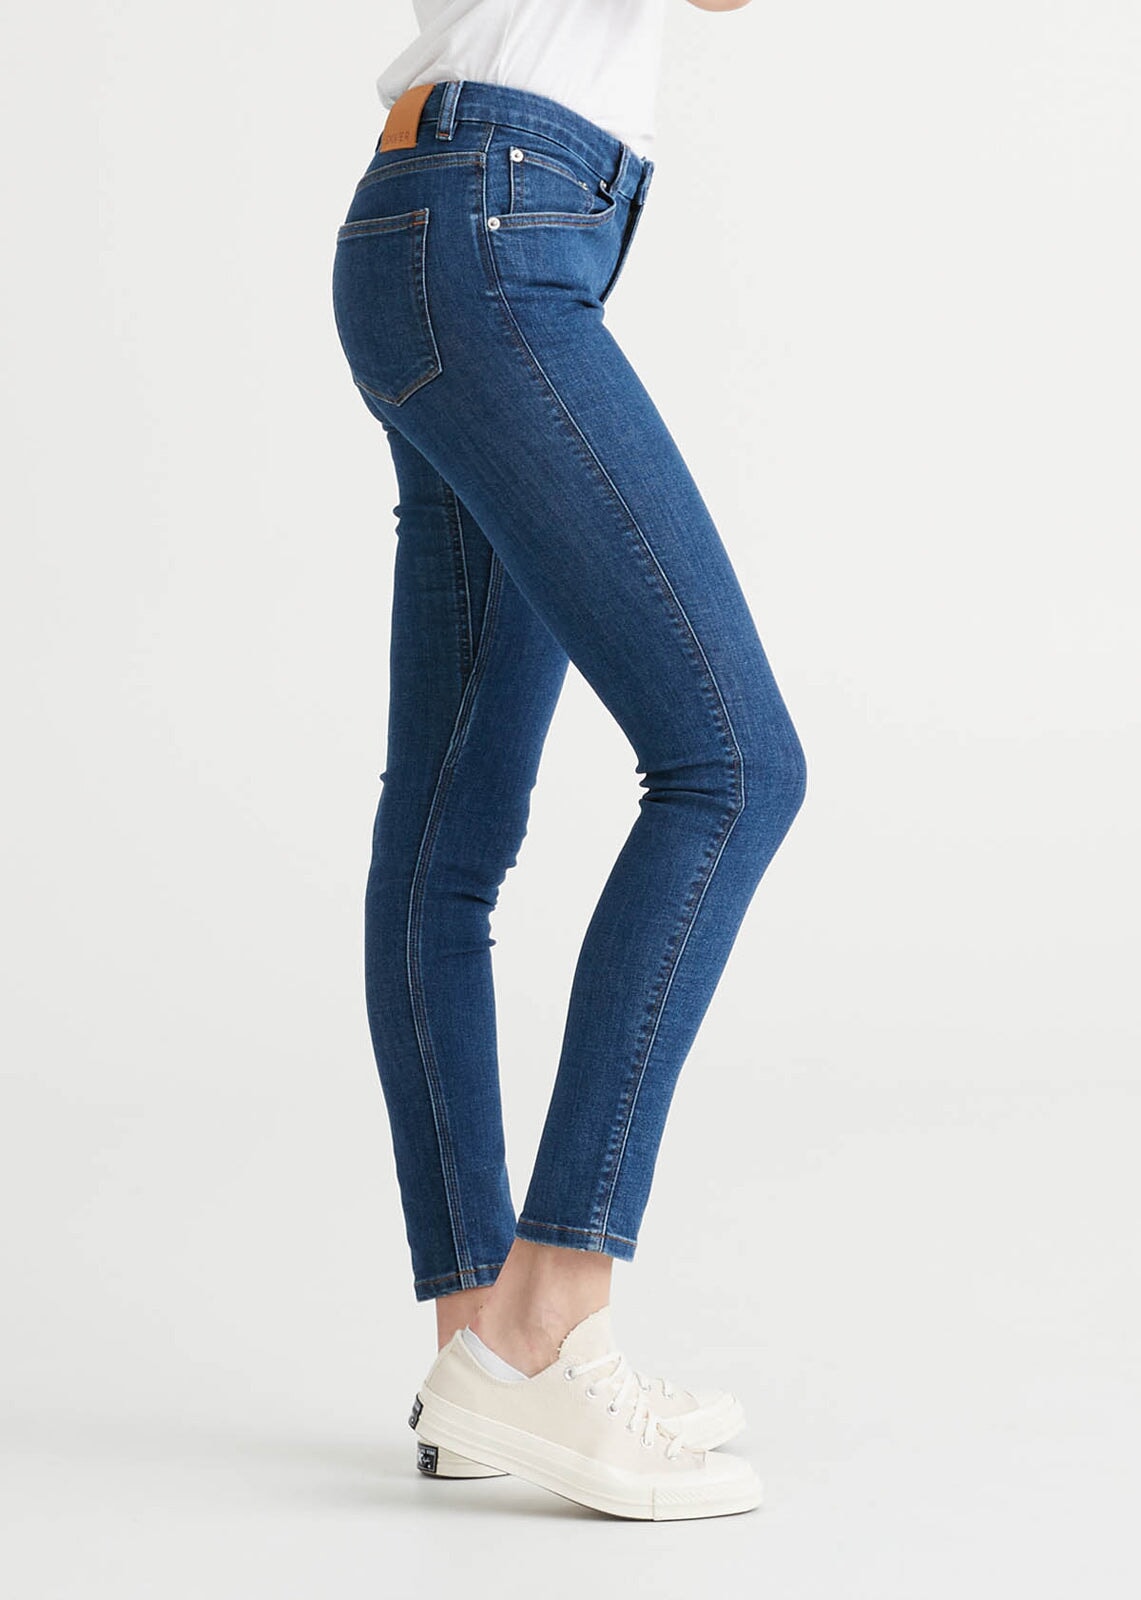 floor Five Nature Women's Skinny Fit Stretch Jeans – DUER